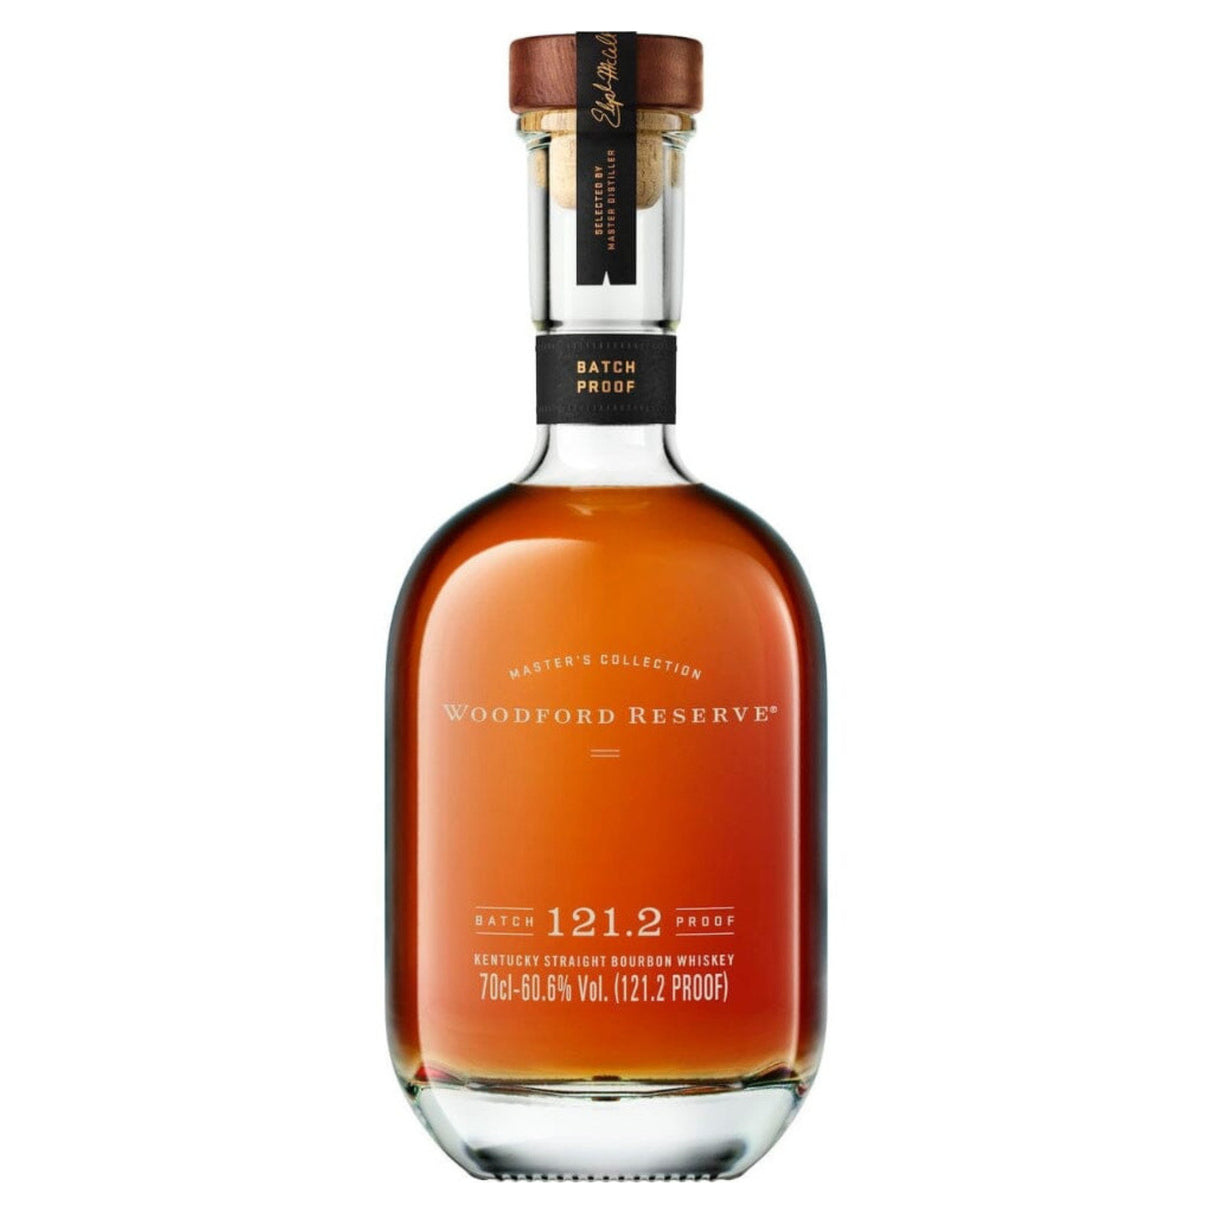 Woodford Reserve Master's Collection Batch Proof Kentucky Straight Bourbon Whiskey - De Wine Spot | DWS - Drams/Whiskey, Wines, Sake